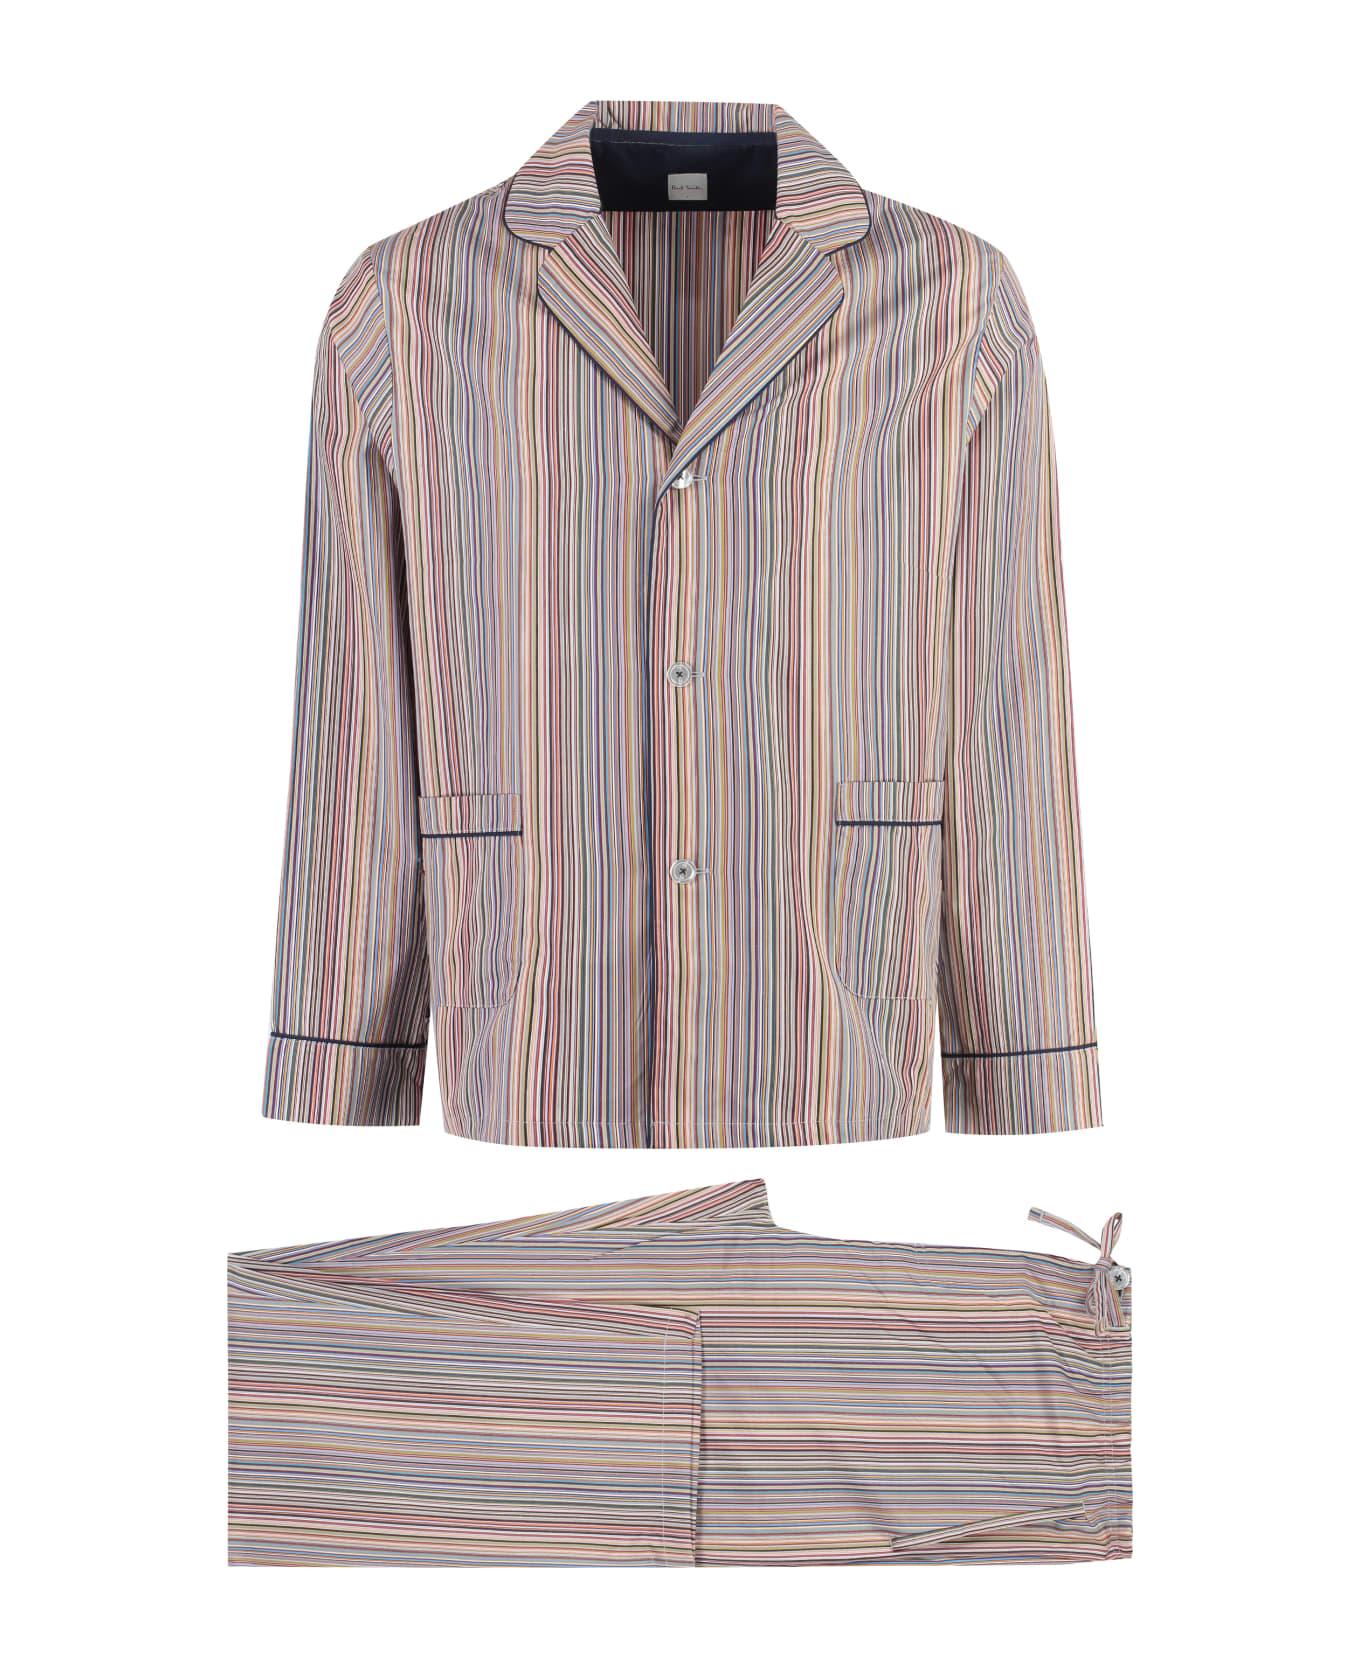 PS by Paul Smith Striped Cotton Pyjamas - Multicolor パジャマ